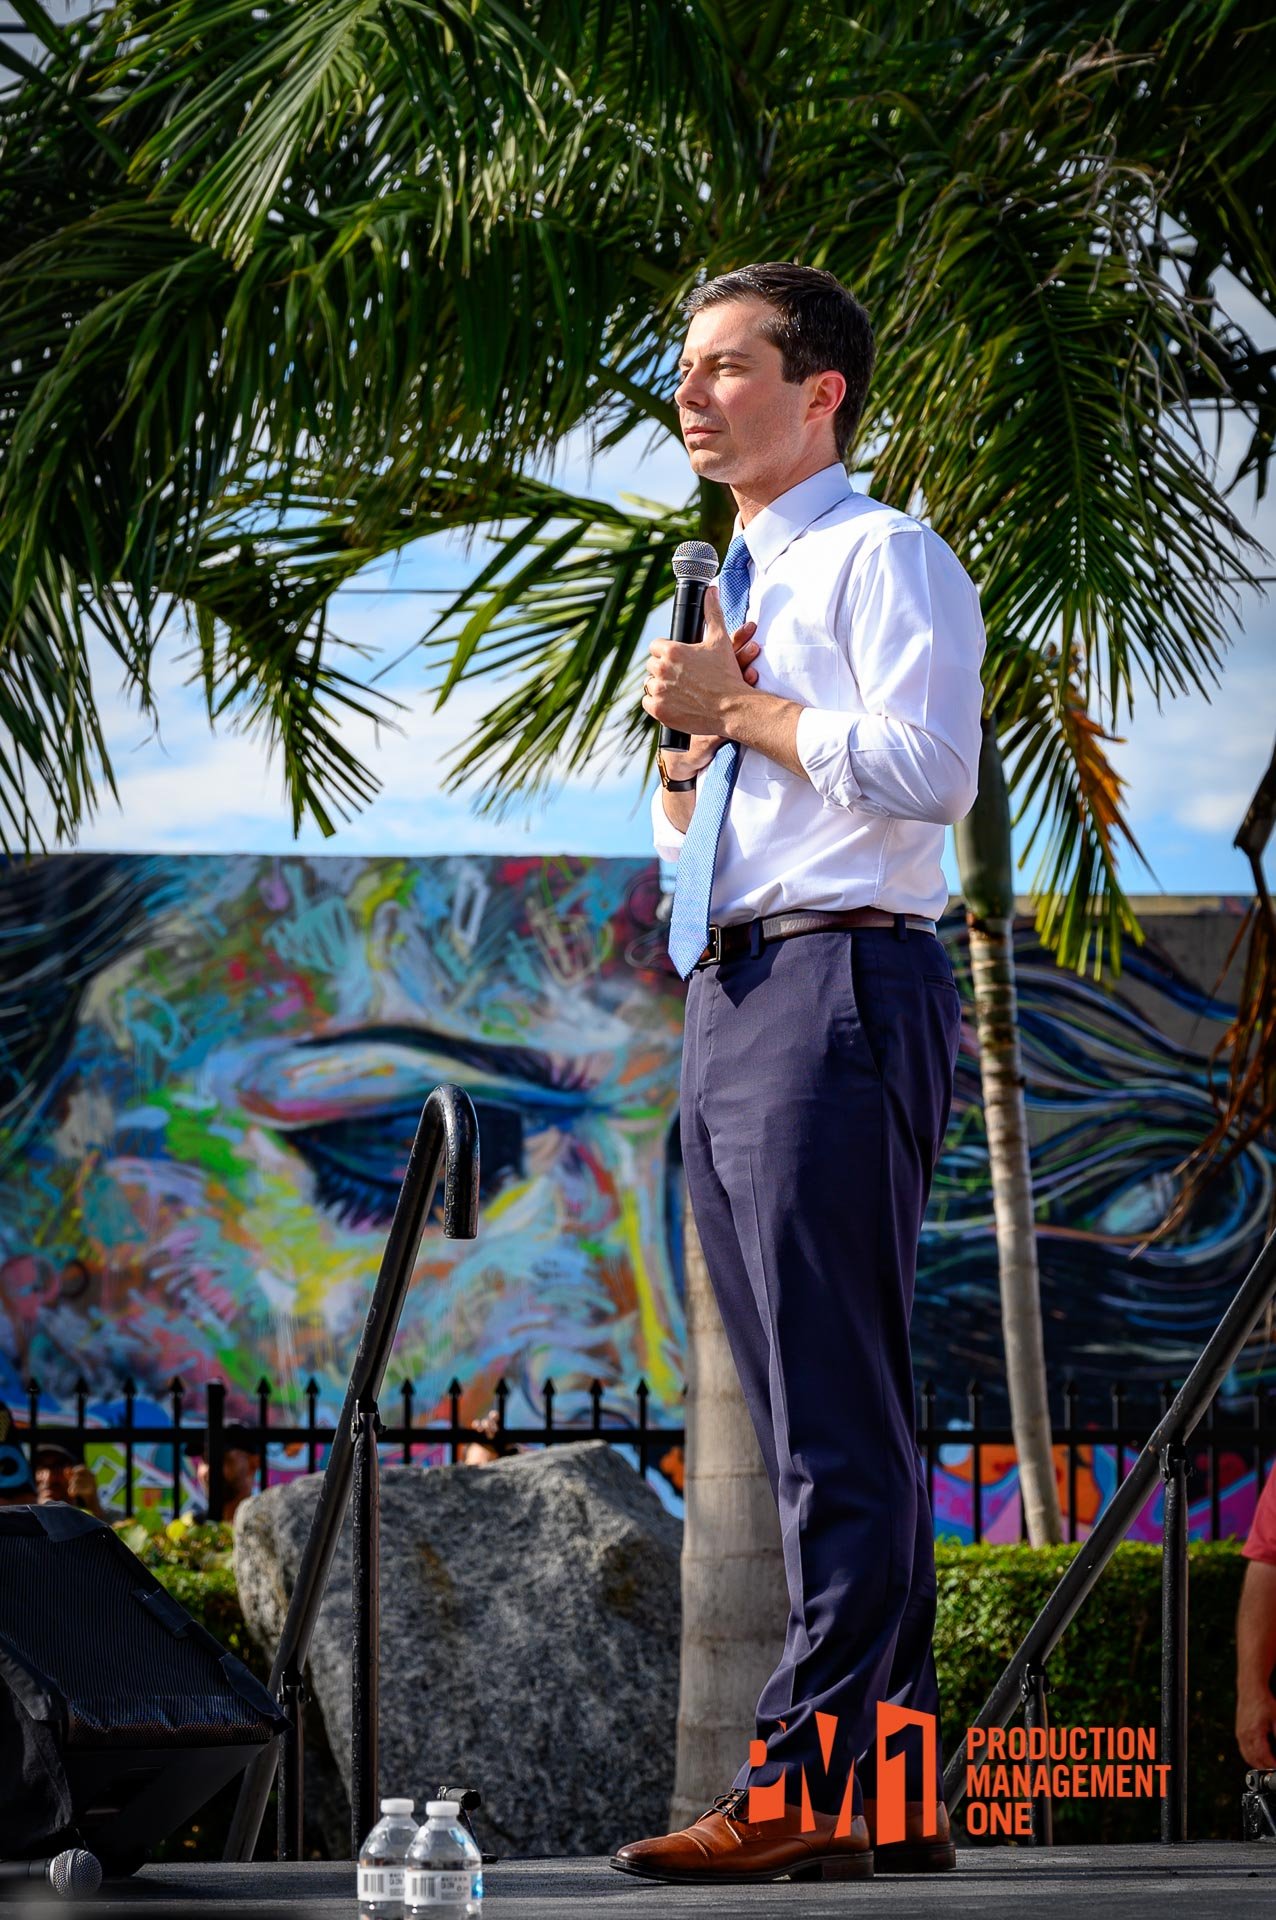 A hopefully presidential candidate speaks to the crowd at Wynwood Walls, Miami in May 2019